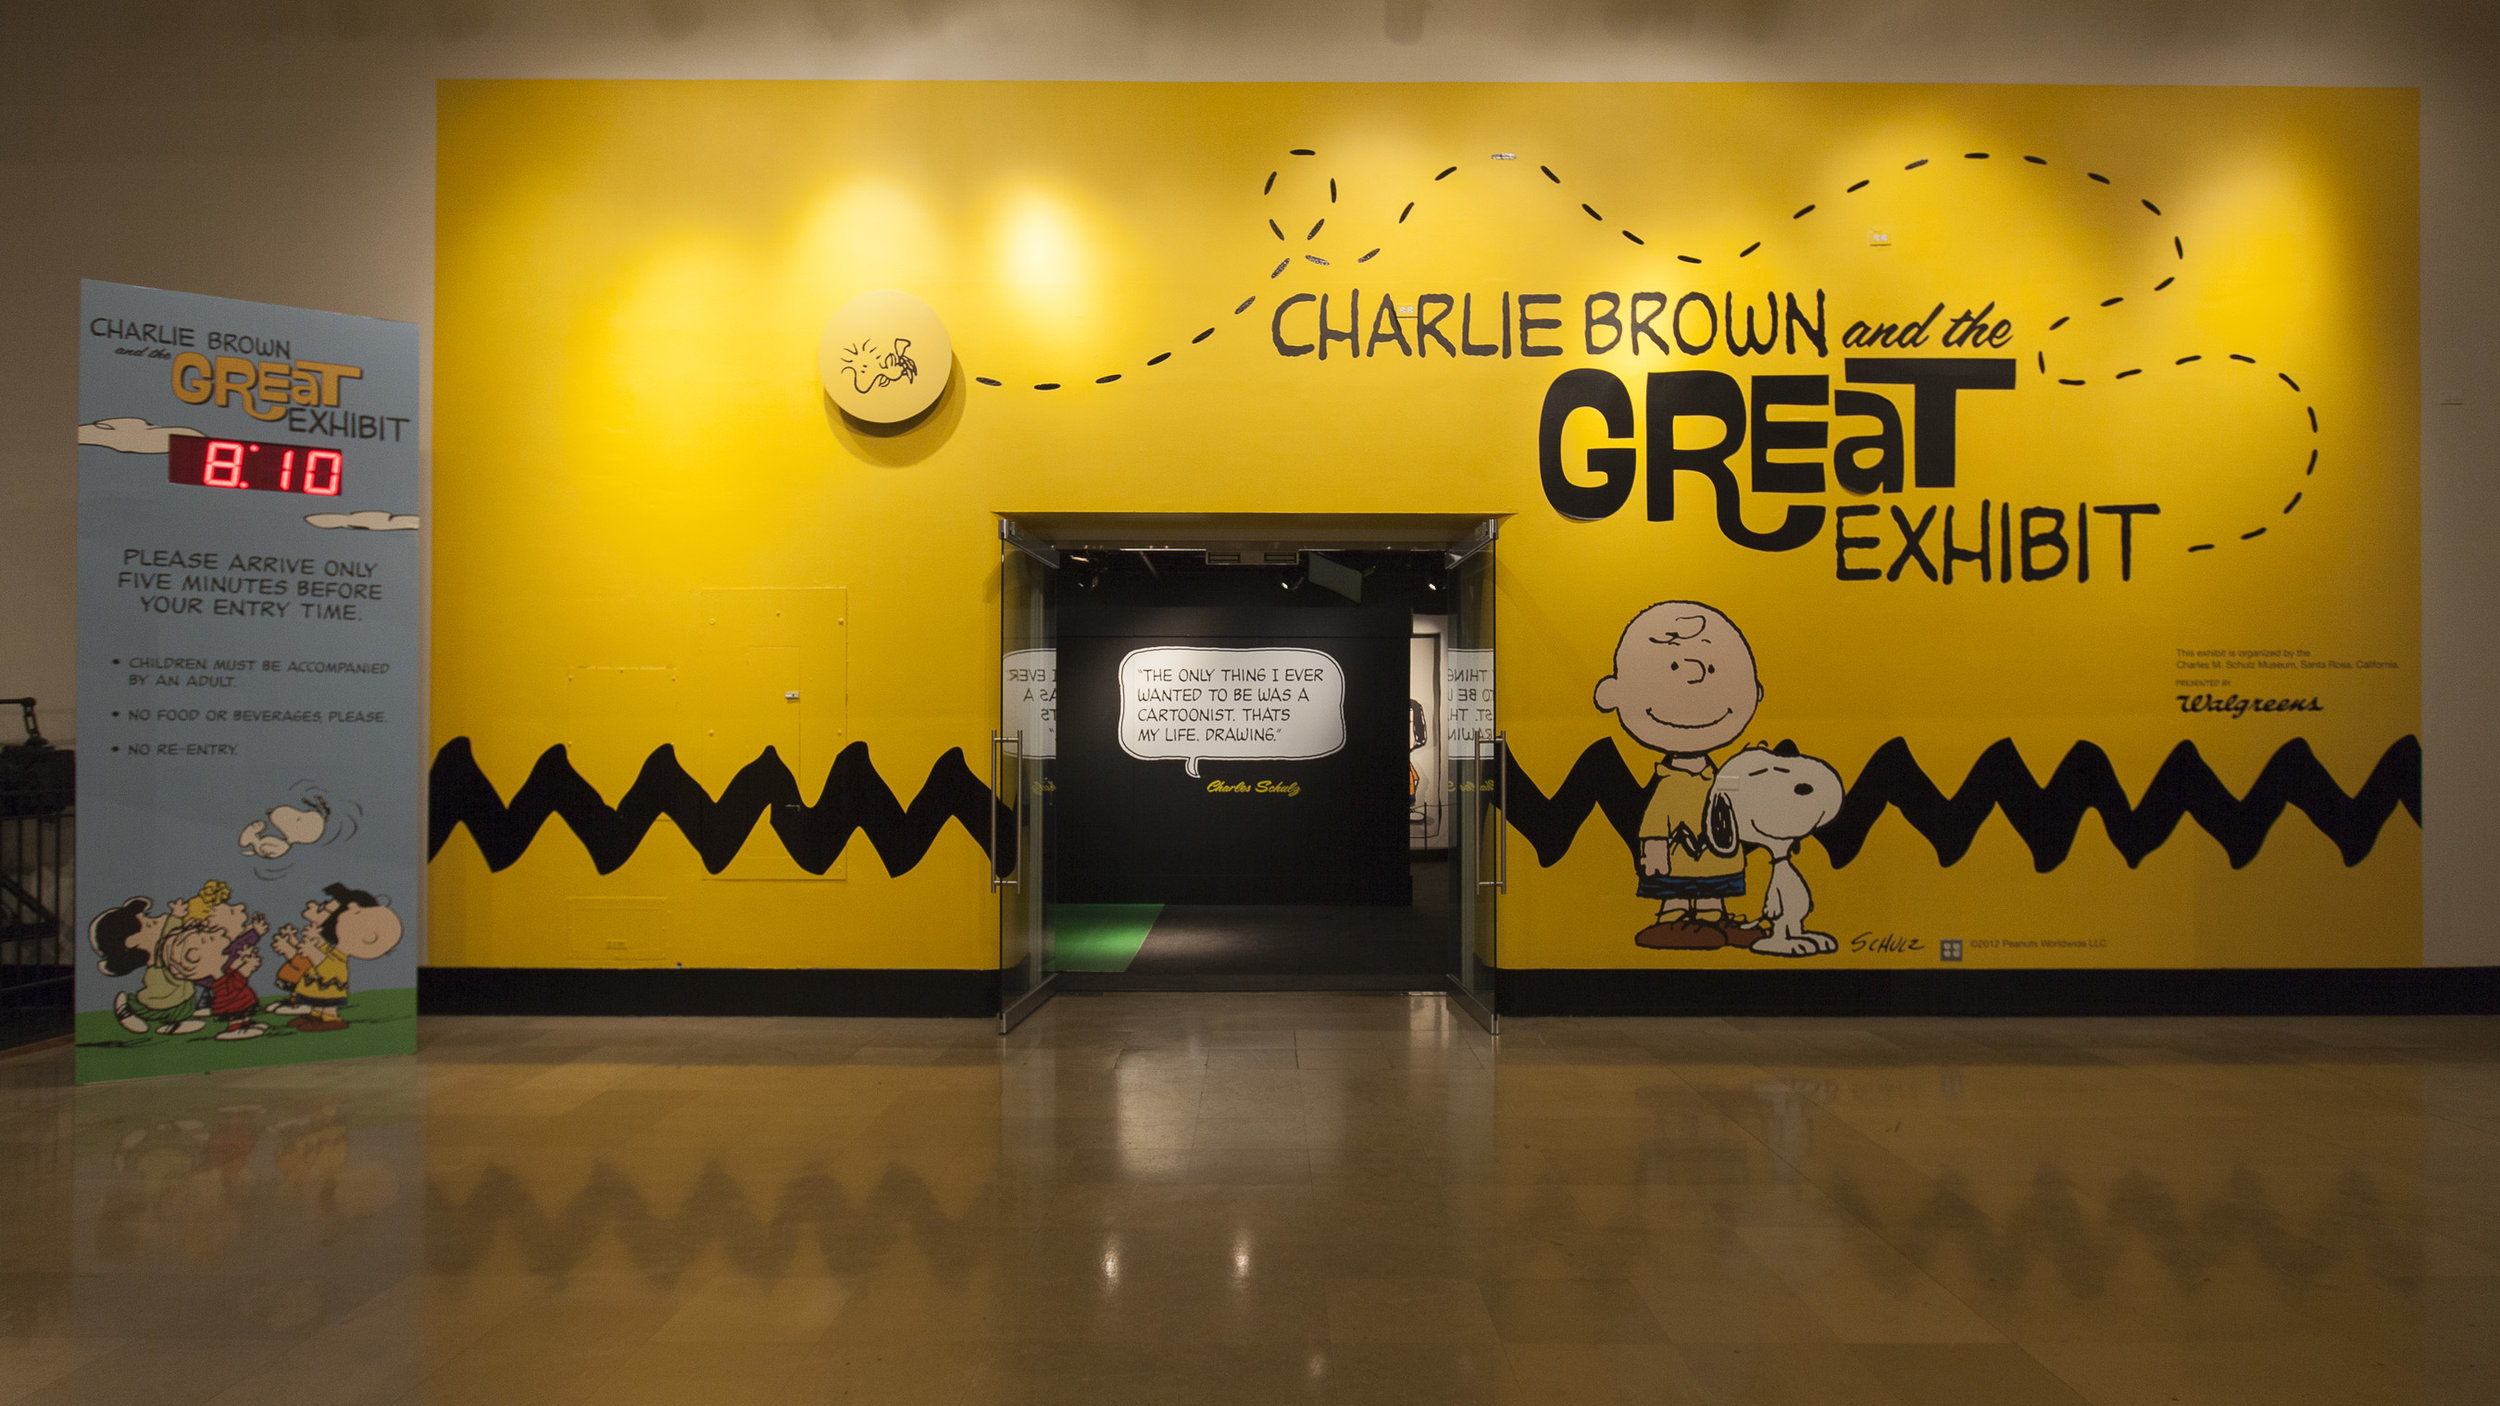 Charlie Brown and the Great Exhibit